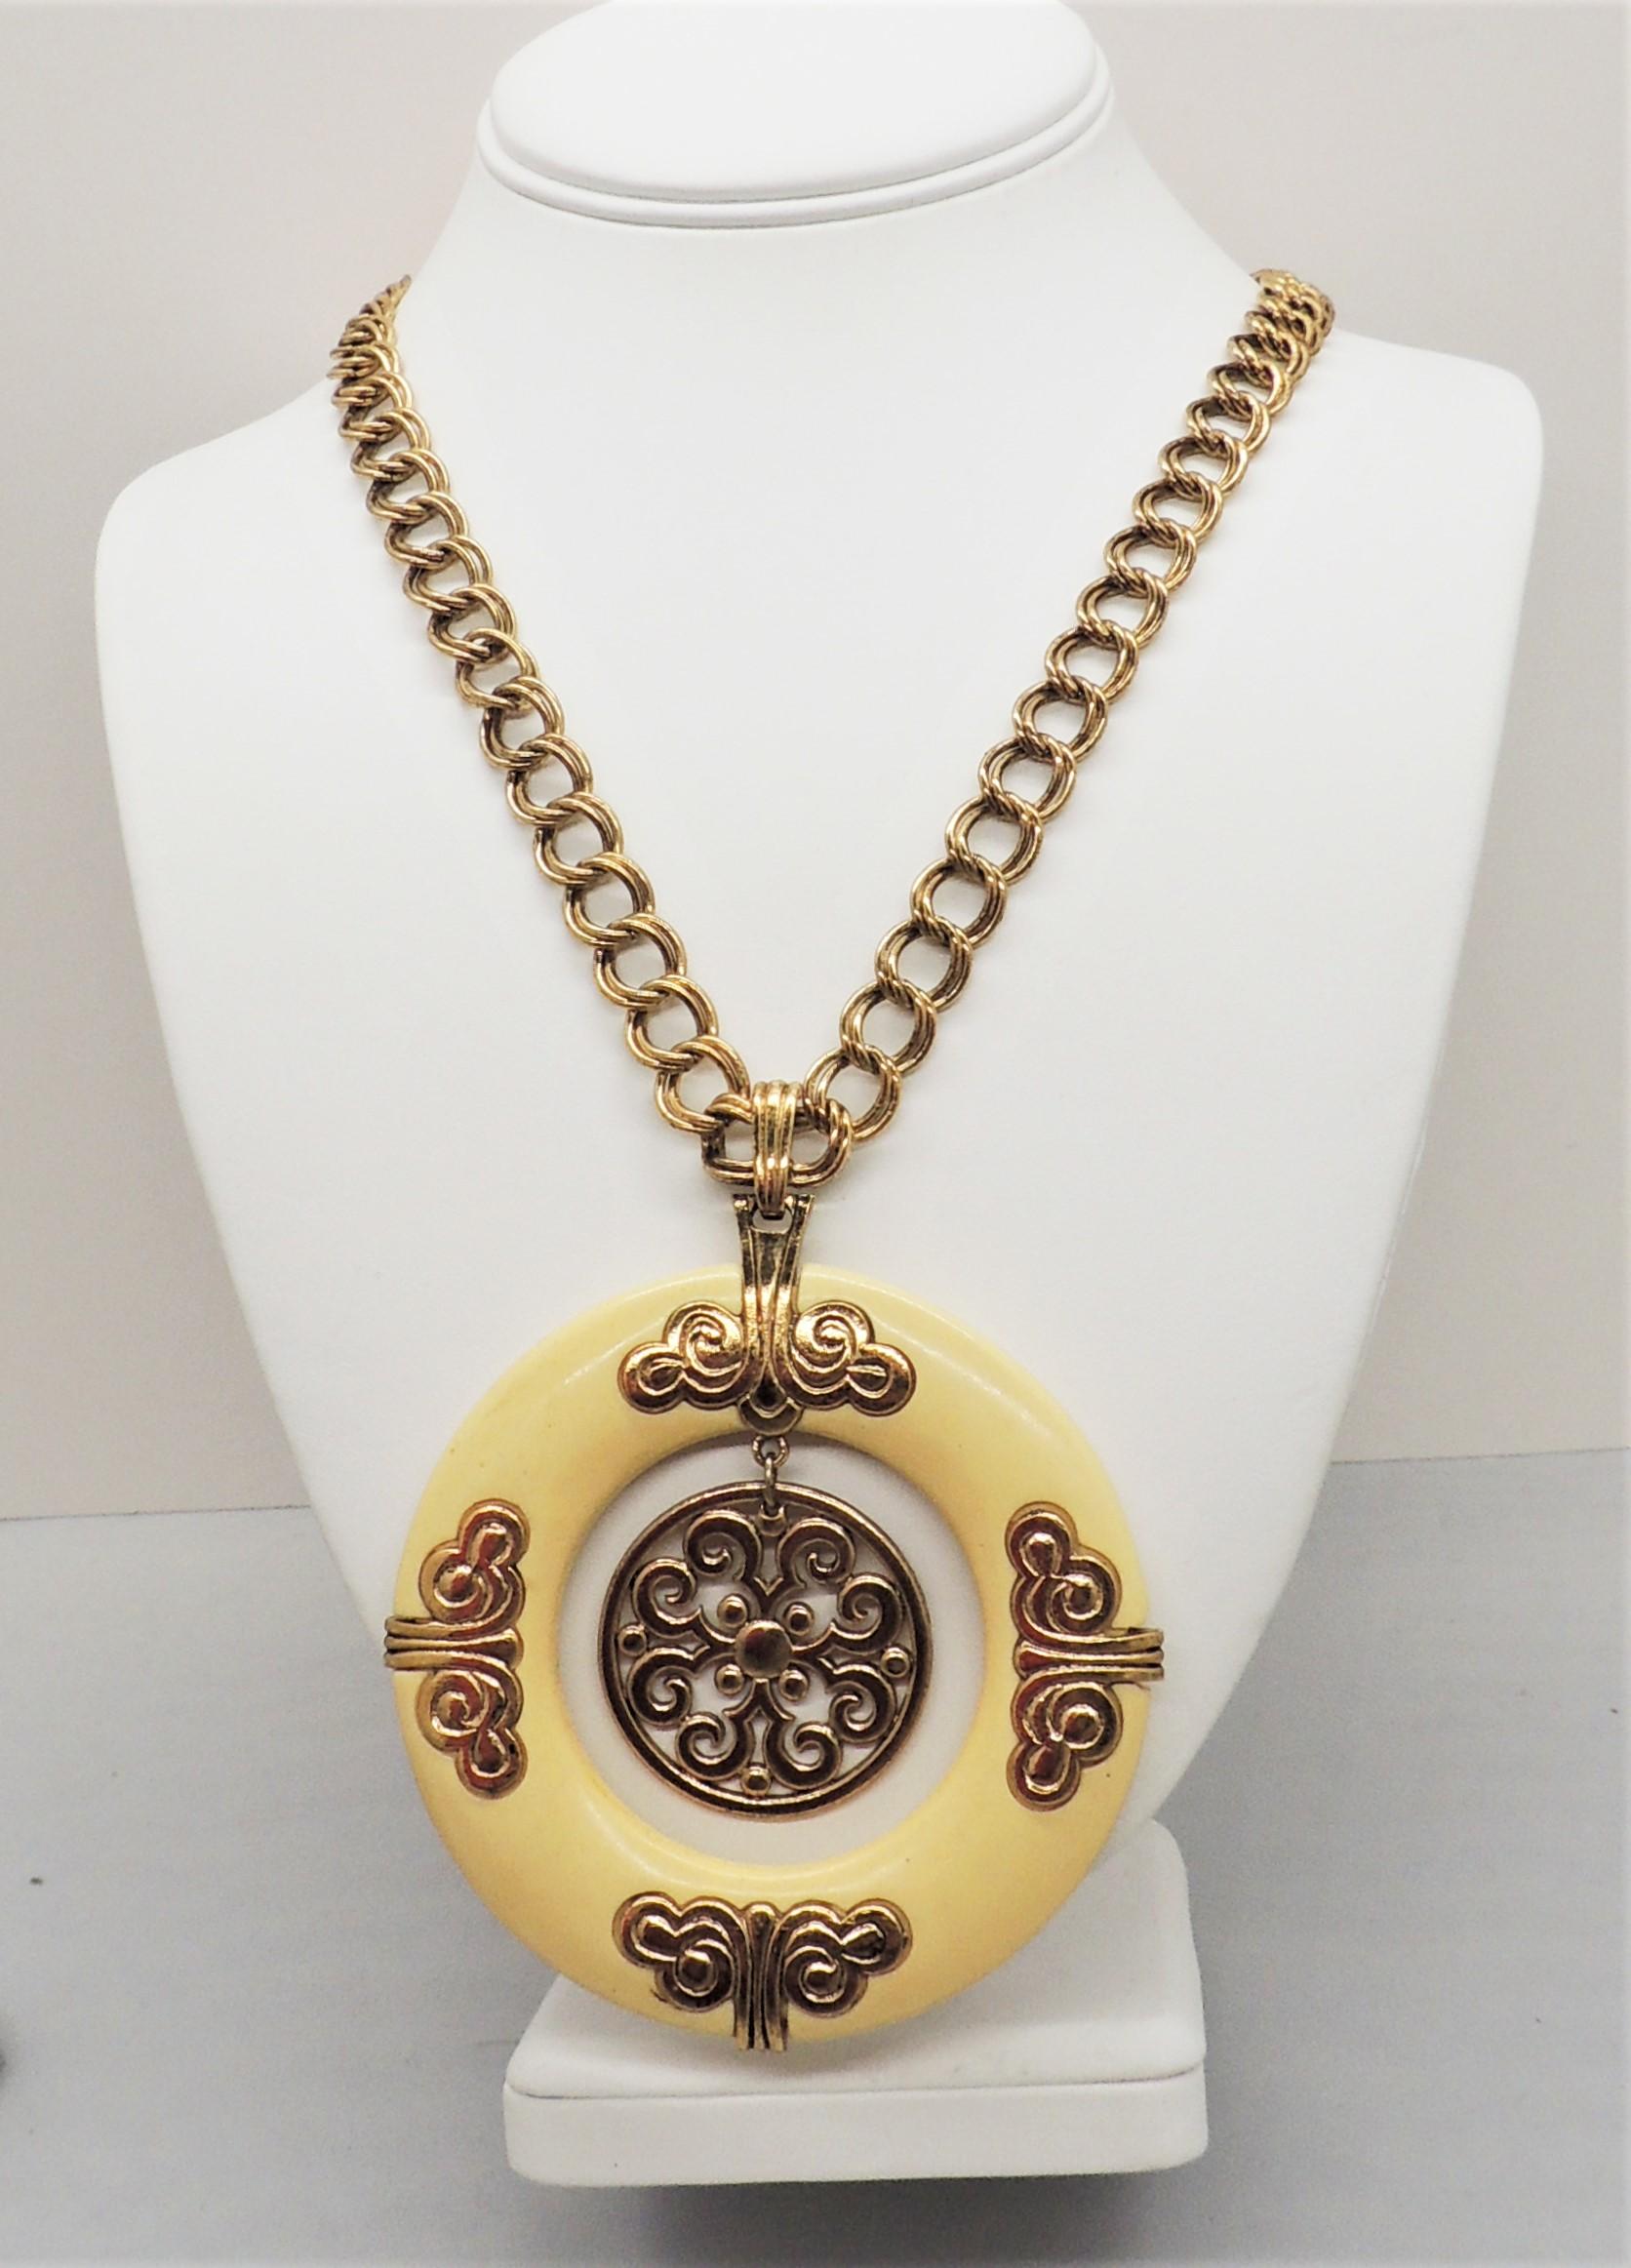 Women's Vintage Signed Crown Trifari Asian Style White Pendant Necklace, 1972 Ad Piece For Sale